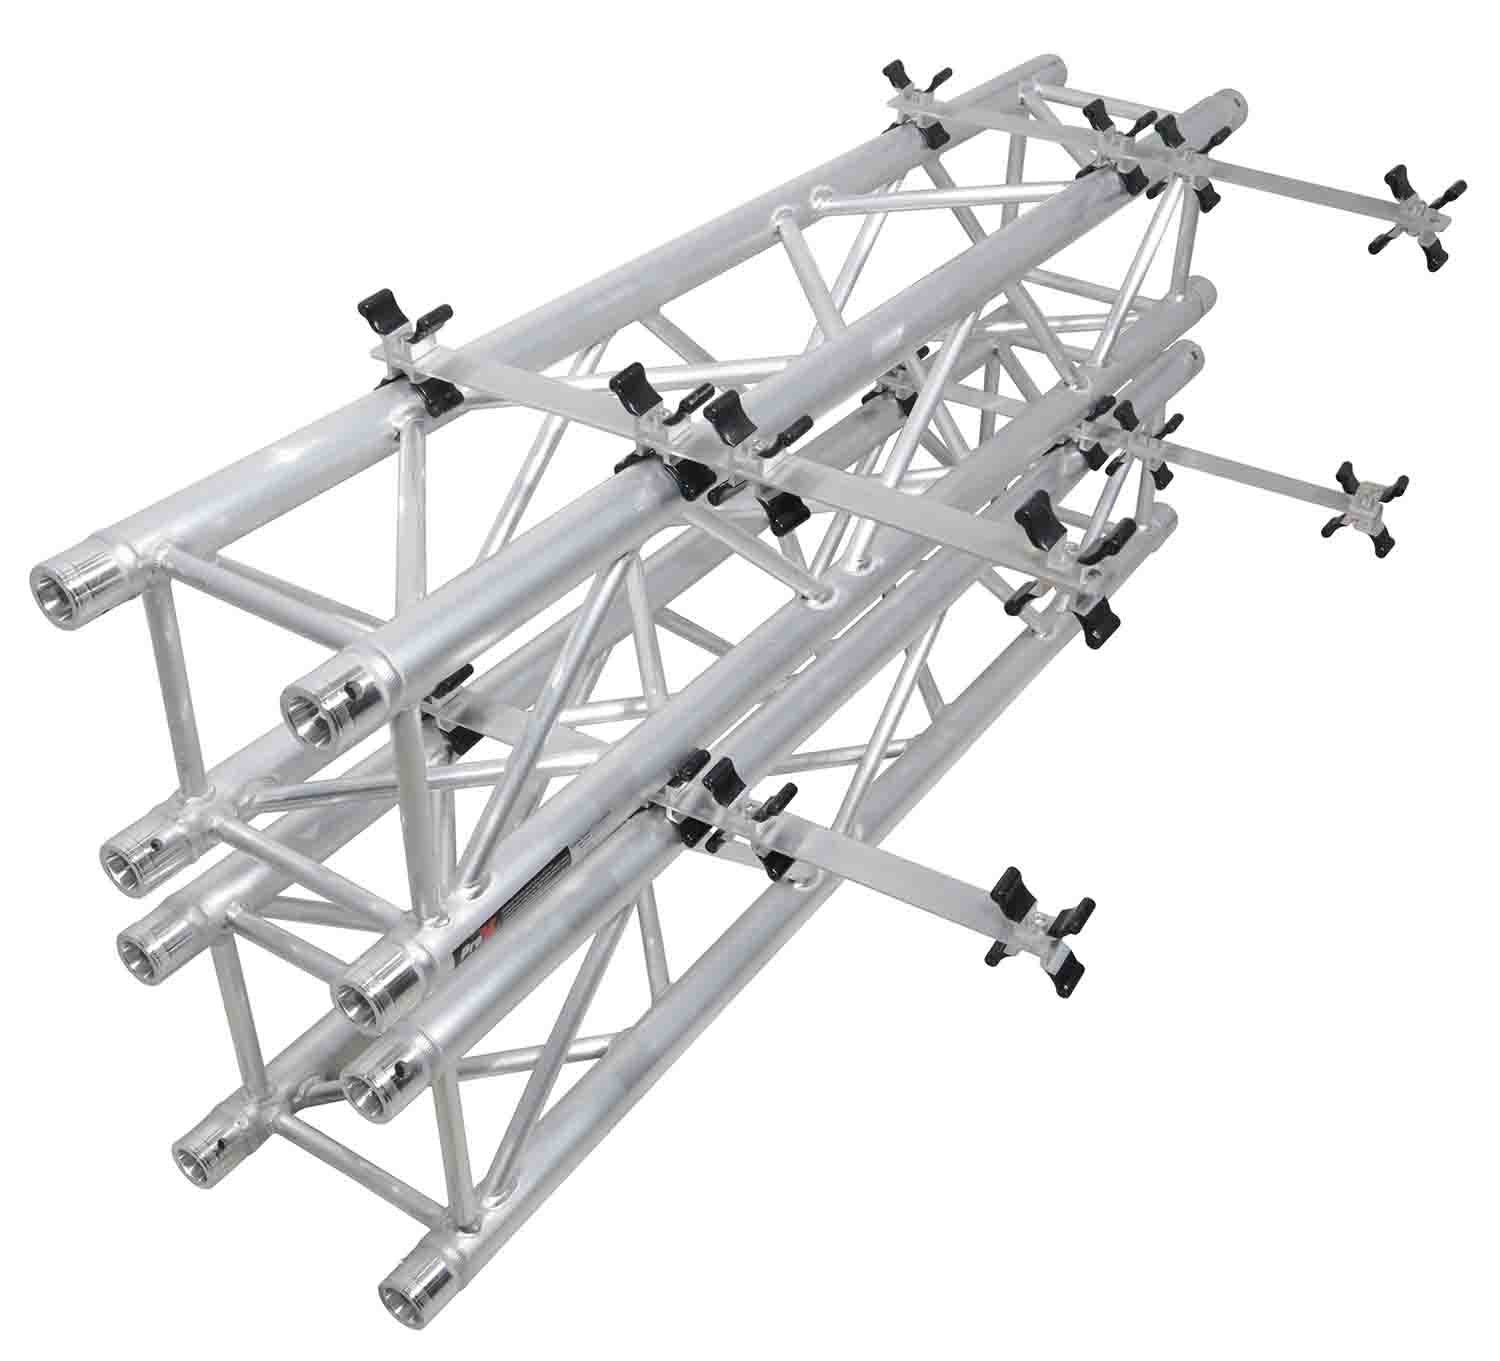 PROX XT-TDS12 Truss Transport Stackable Spacers for XT-TDKIT Truss Dolly System - Hollywood DJ